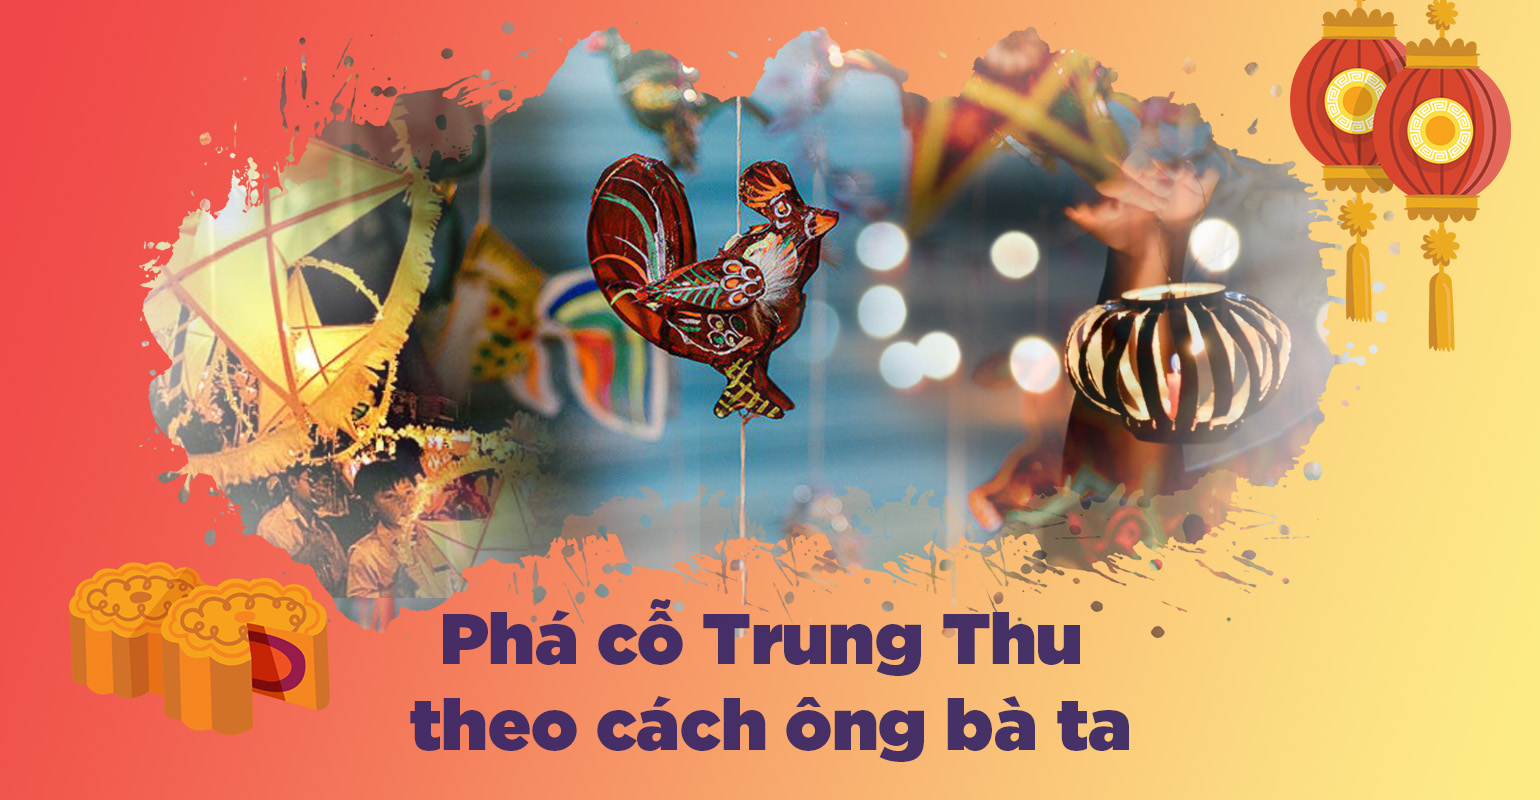  How to enjoy Mid-Autumn Festival by Vietnamese tradition